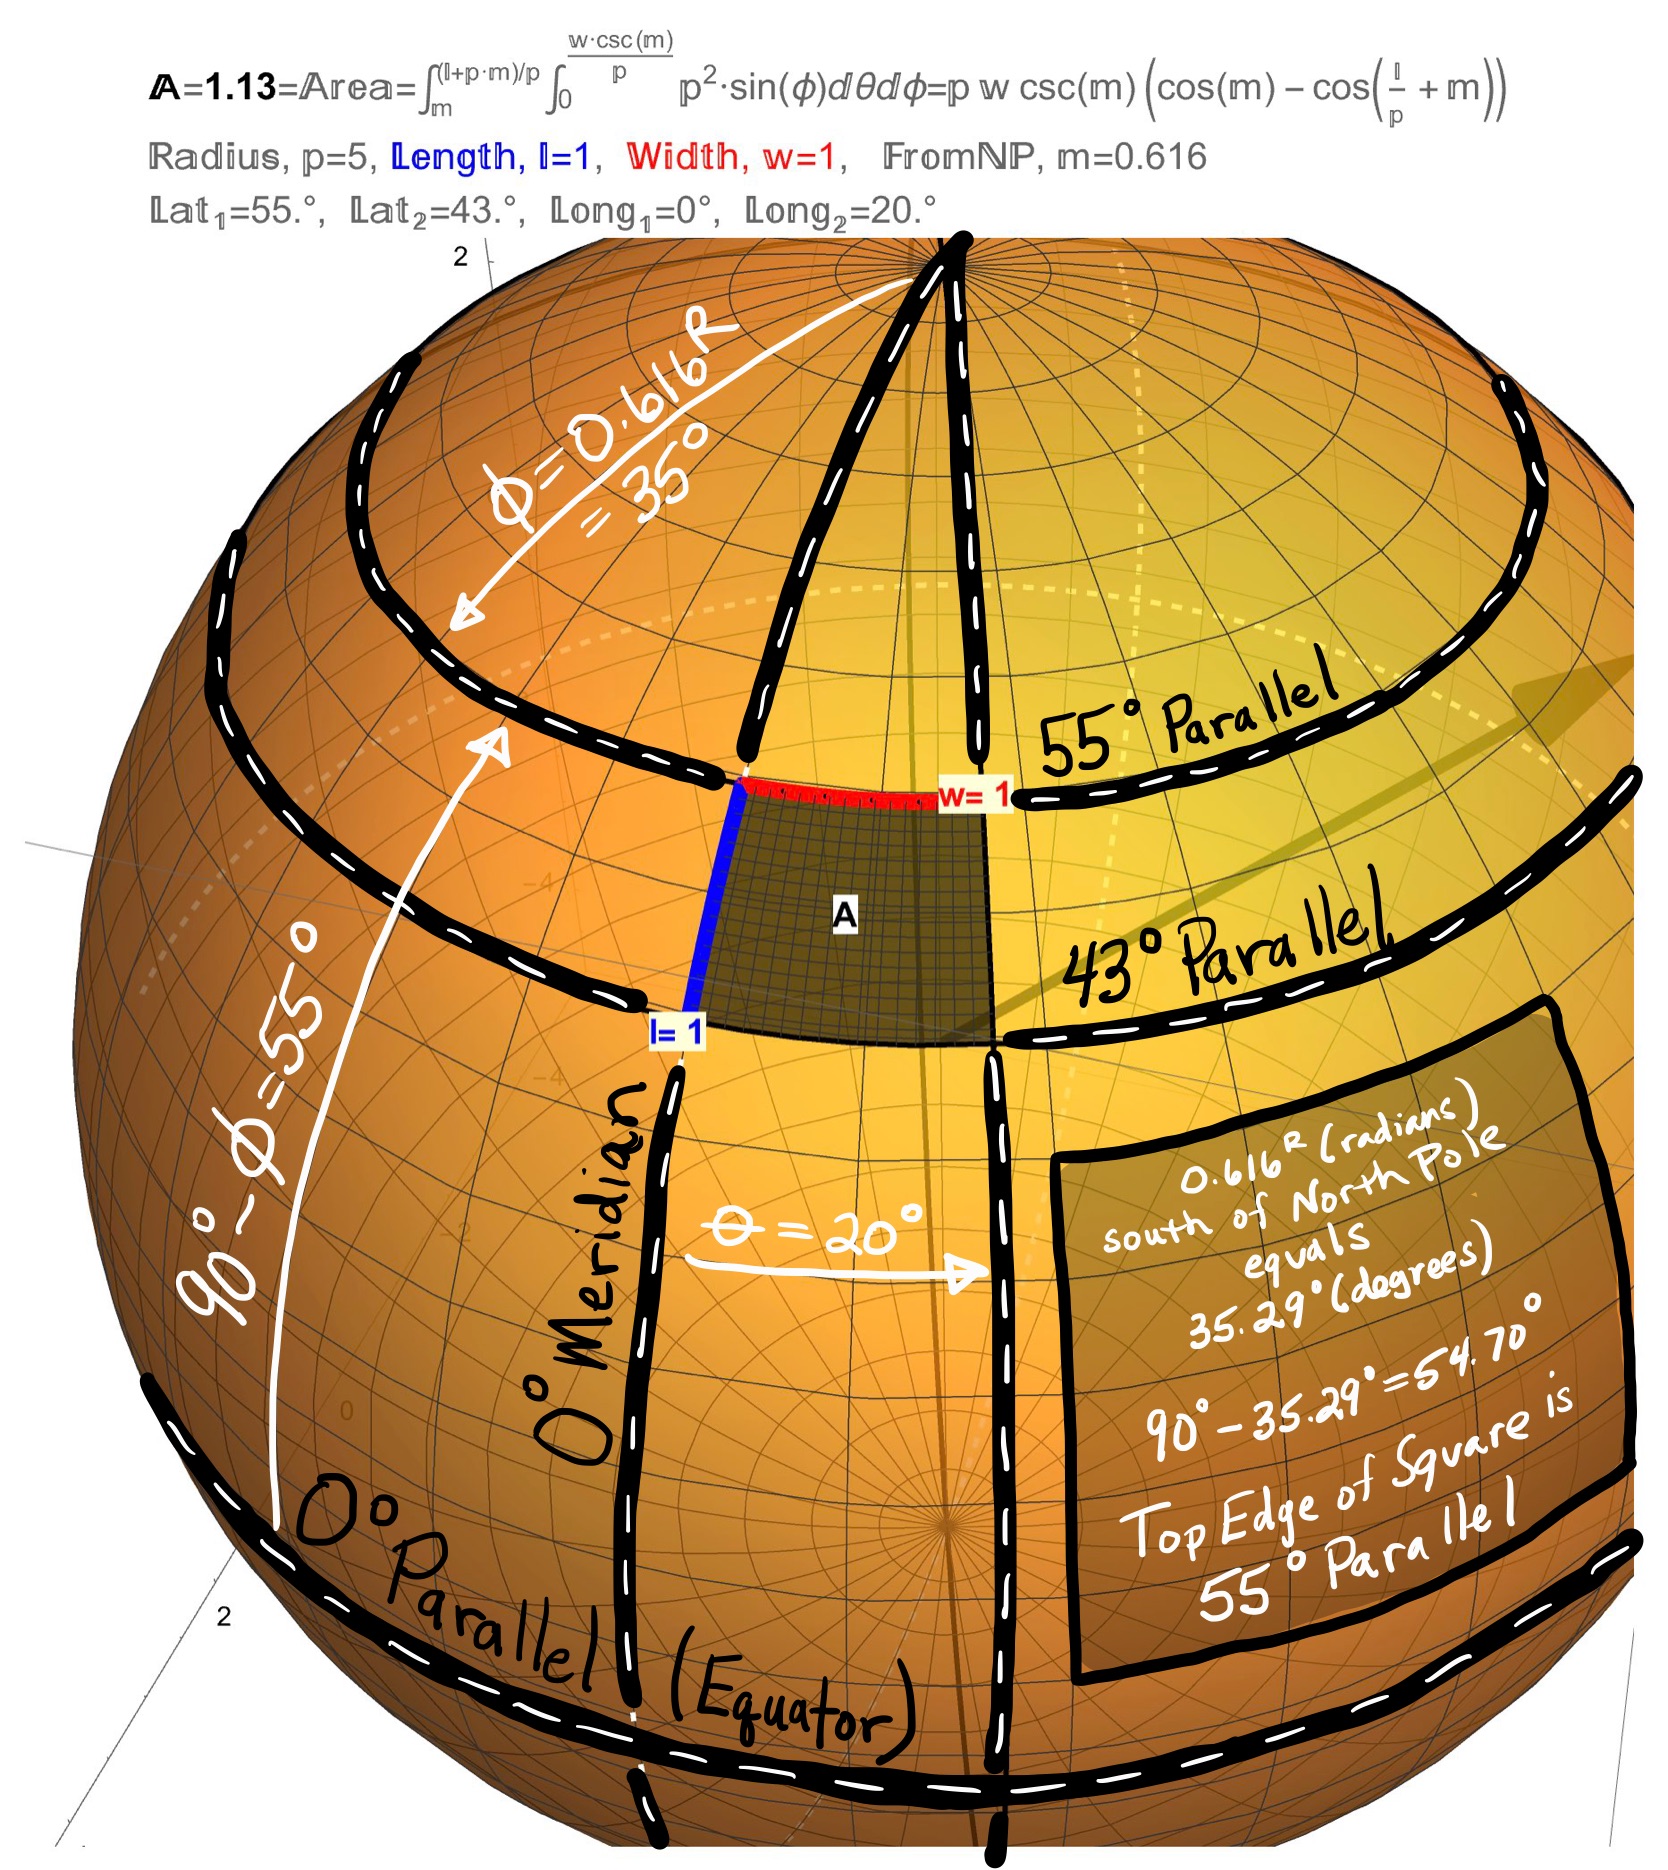 Special Curves and Regions On a Sphere: Describe the sphere parametrically as \(r(\theta,\phi)=(\rho\sin(\phi)\cos(\theta),\rho\sin(\phi)\sin(\theta),\rho\cos(\phi))\) with \(\theta\) the Longitude angle (measured from the Prime Meridian) and \(\phi\) the Latitude angle (measured from the North Pole). The Meridians are the circles of constant Longitude \(\theta=k\) given by \(r(\phi)=(\rho\sin(\phi)\cos(k),\rho\sin(\phi)\sin(k),\rho\cos(\phi))\). The Parallels are the circles of constant Latitude \(\phi=c\) given by \(r(\theta)=(\rho\sin(c)\cos(\theta),\rho\sin(c)\sin(\theta),\rho\cos(c)).\) A Special Parallel is the Equator (\(\phi=c=\pi/2\)) given by \(r(\theta)=(\rho\cos(\theta),\rho\sin(\theta),0)\). A Special Meridian is the Prime Meridian (\(\theta=k=0\)) given by \(r(\phi)=(\rho\sin(\phi),0,\rho\cos(\phi))\).